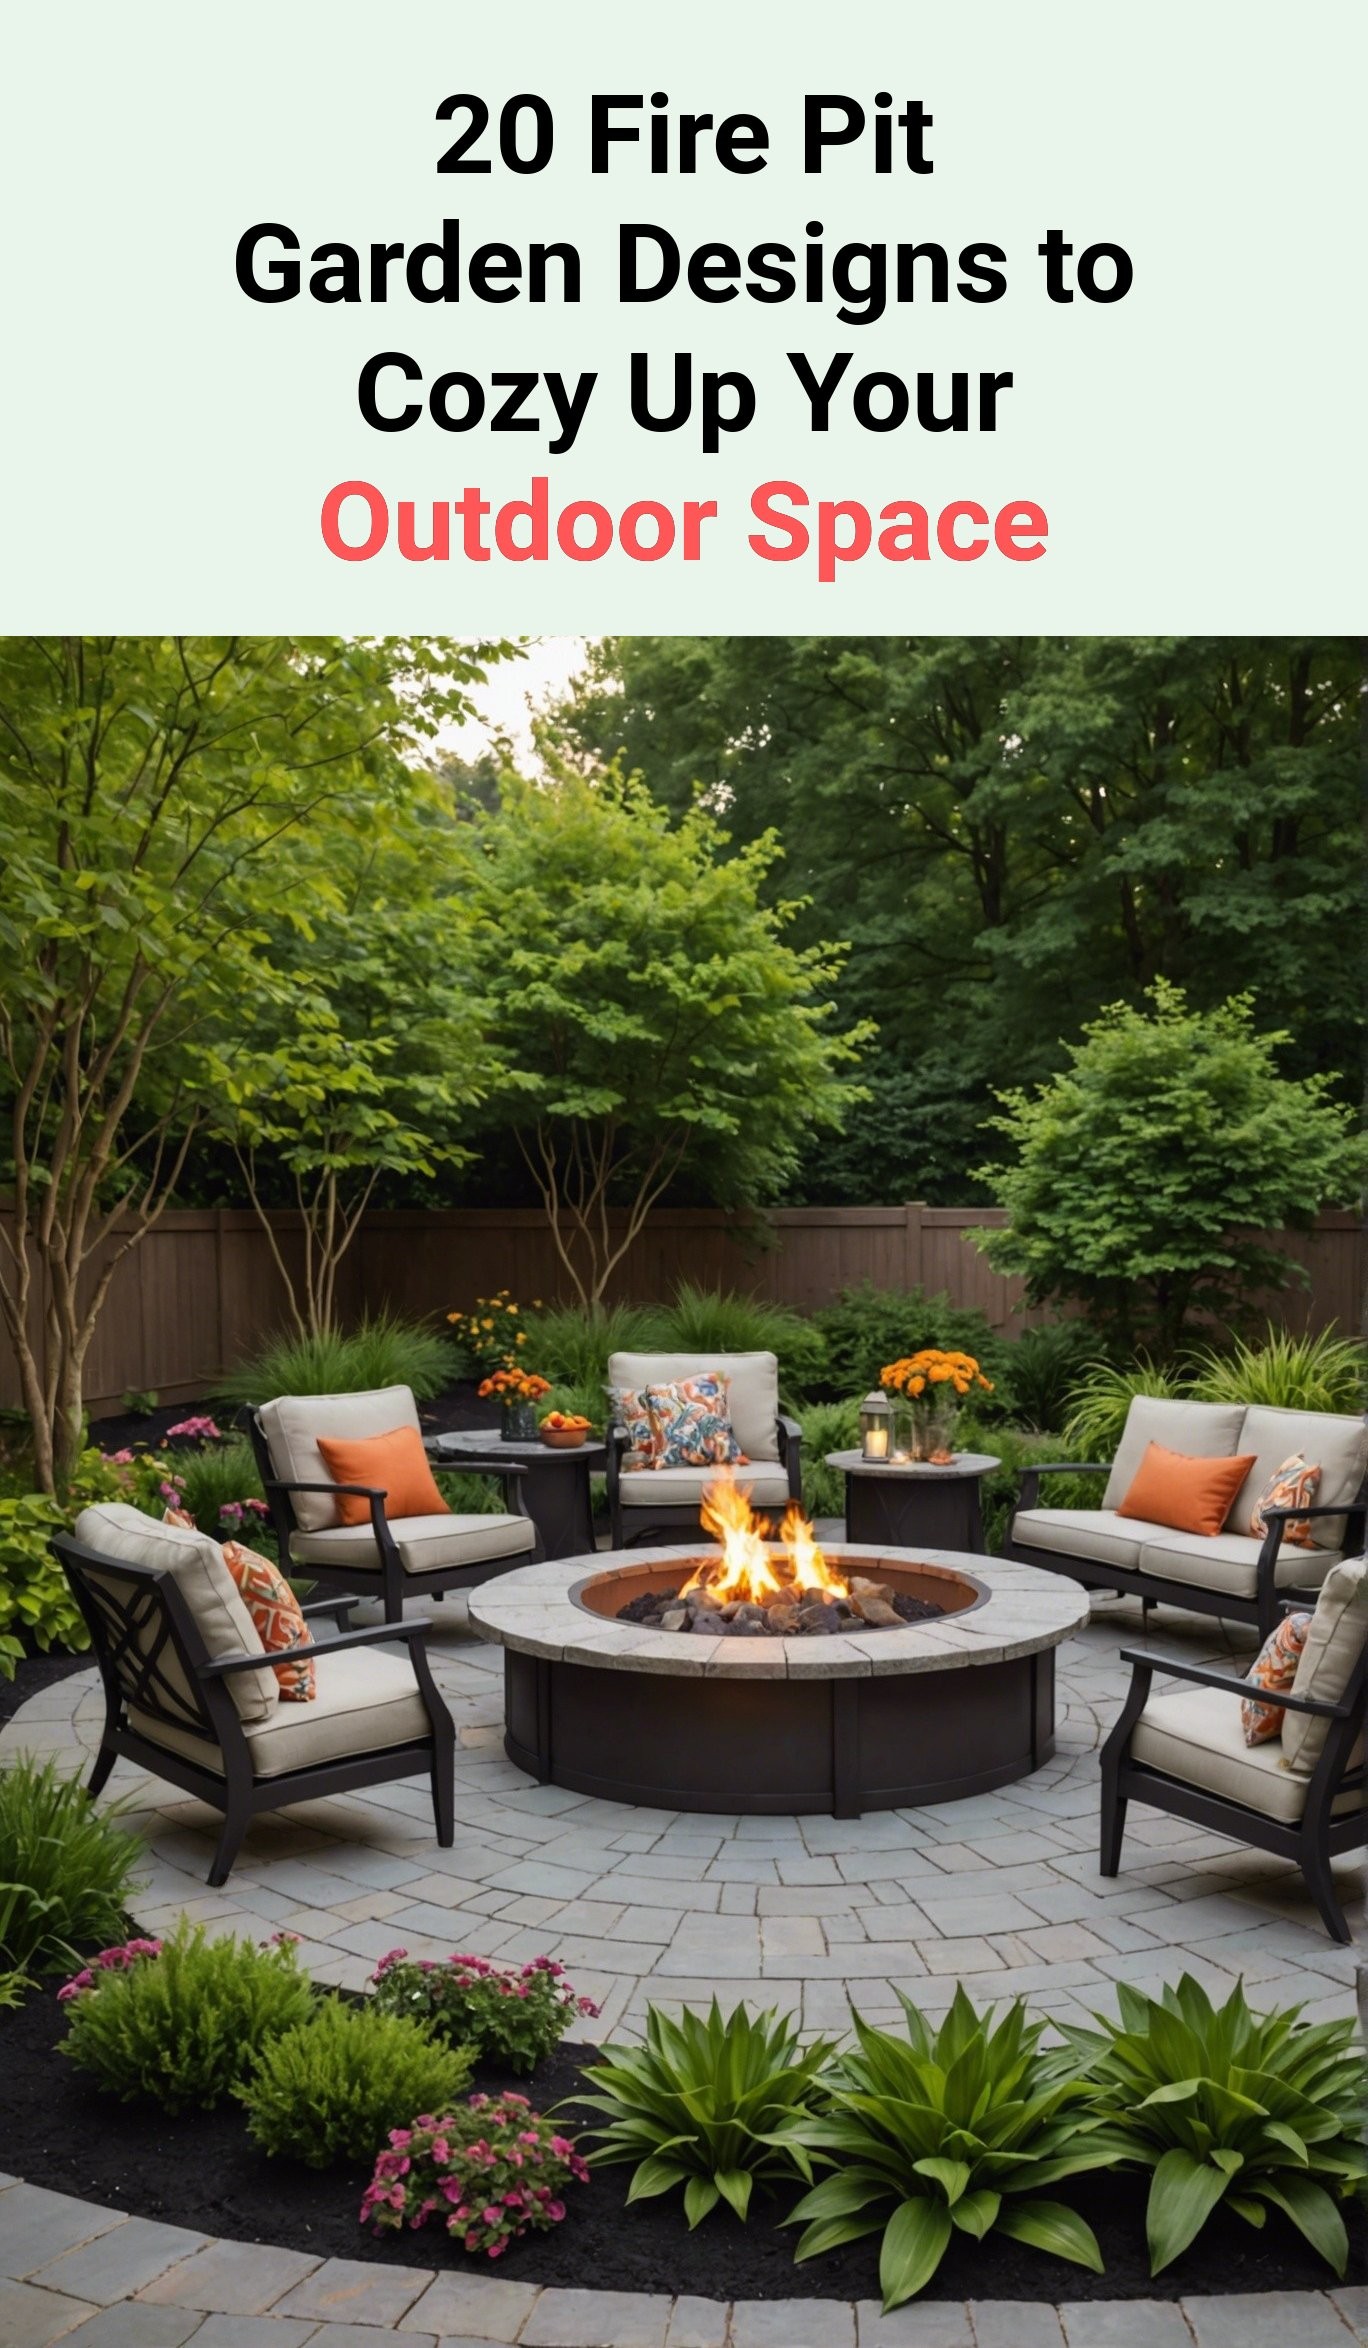 20 Fire Pit Garden Designs to Cozy Up Your Outdoor Space